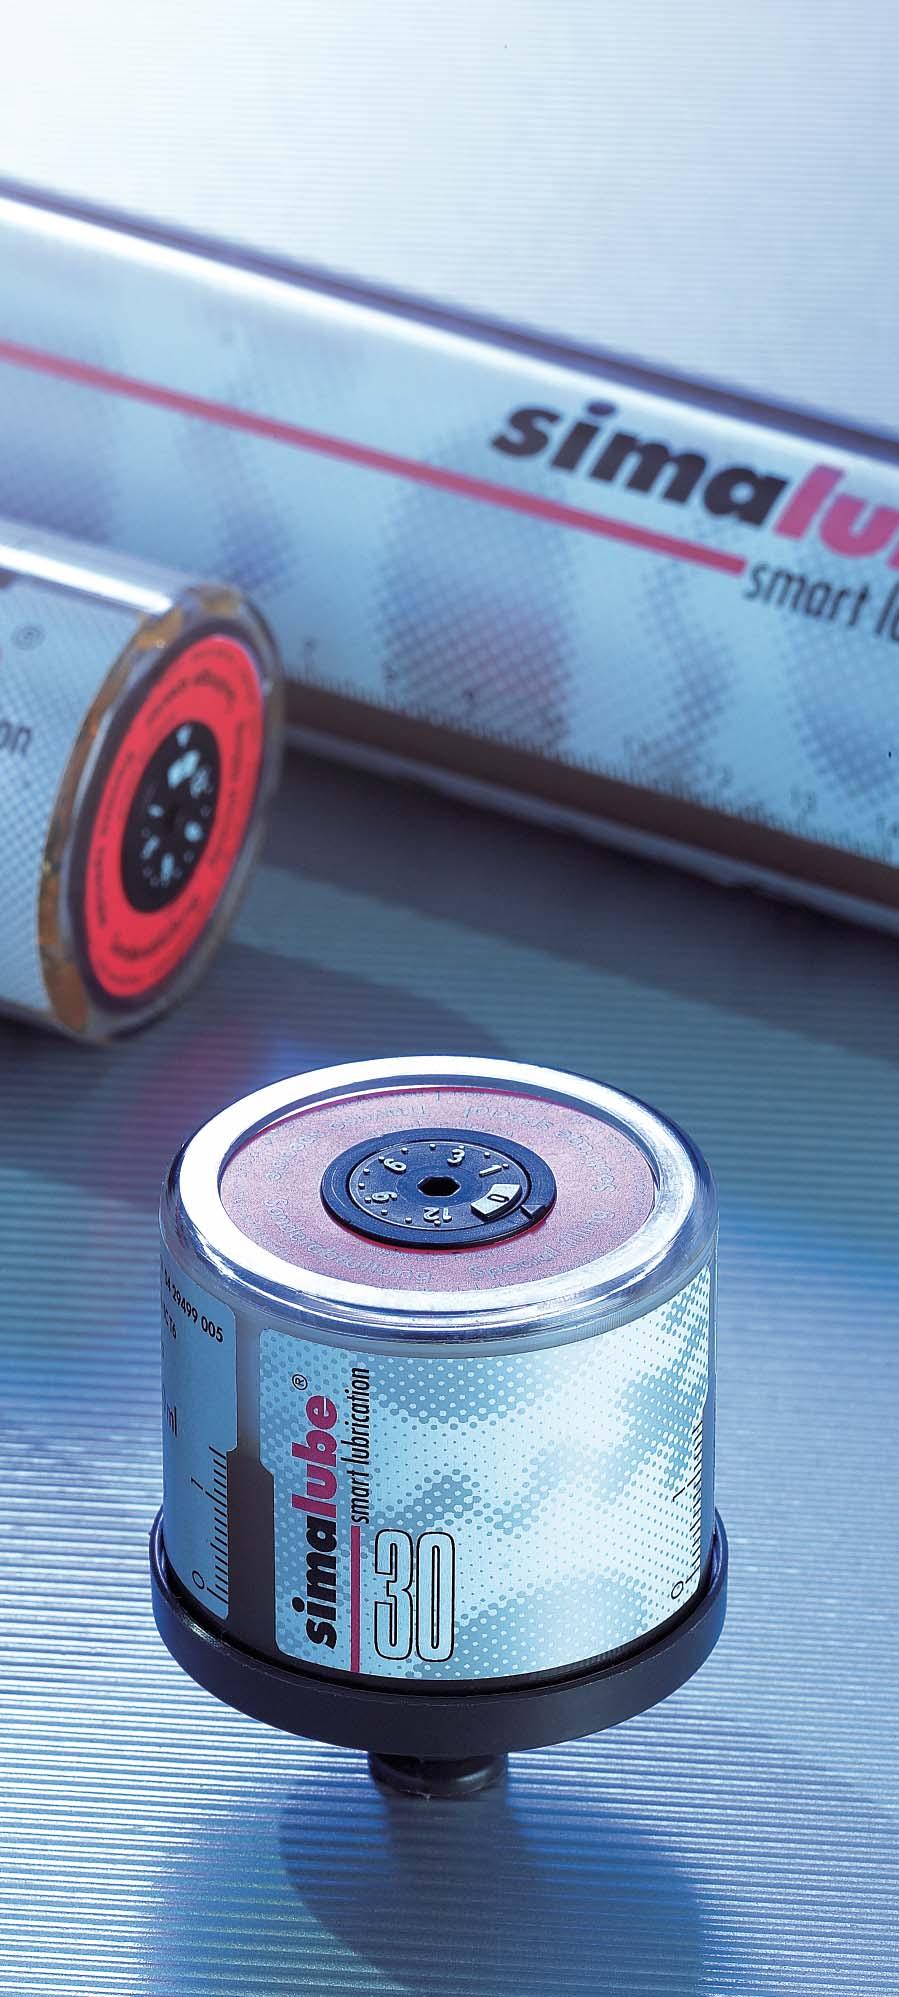 Universal application simalube is available with a wide range of standard greases and oils. Customer specific lubricants can be used if suitable.